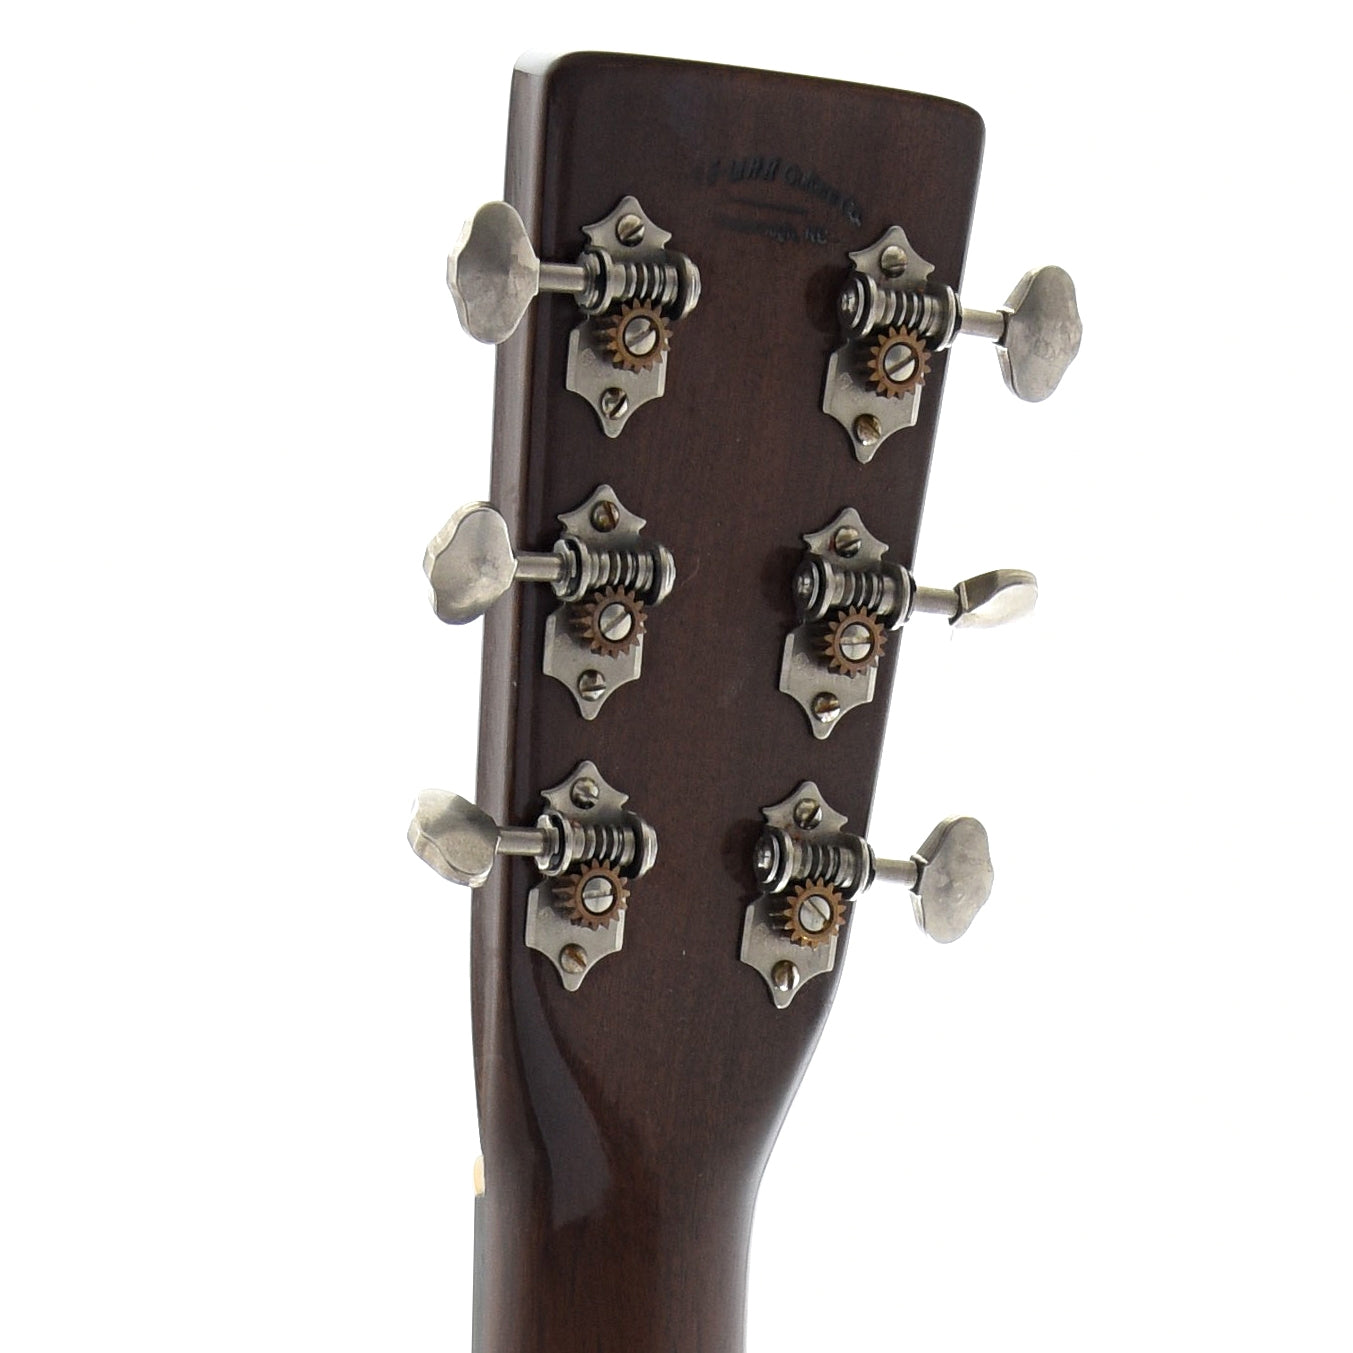 Image 7 of Pre-War Guitars Co. Triple-O Mahogany, Level 1 Aging - SKU# PW000M : Product Type Flat-top Guitars : Elderly Instruments